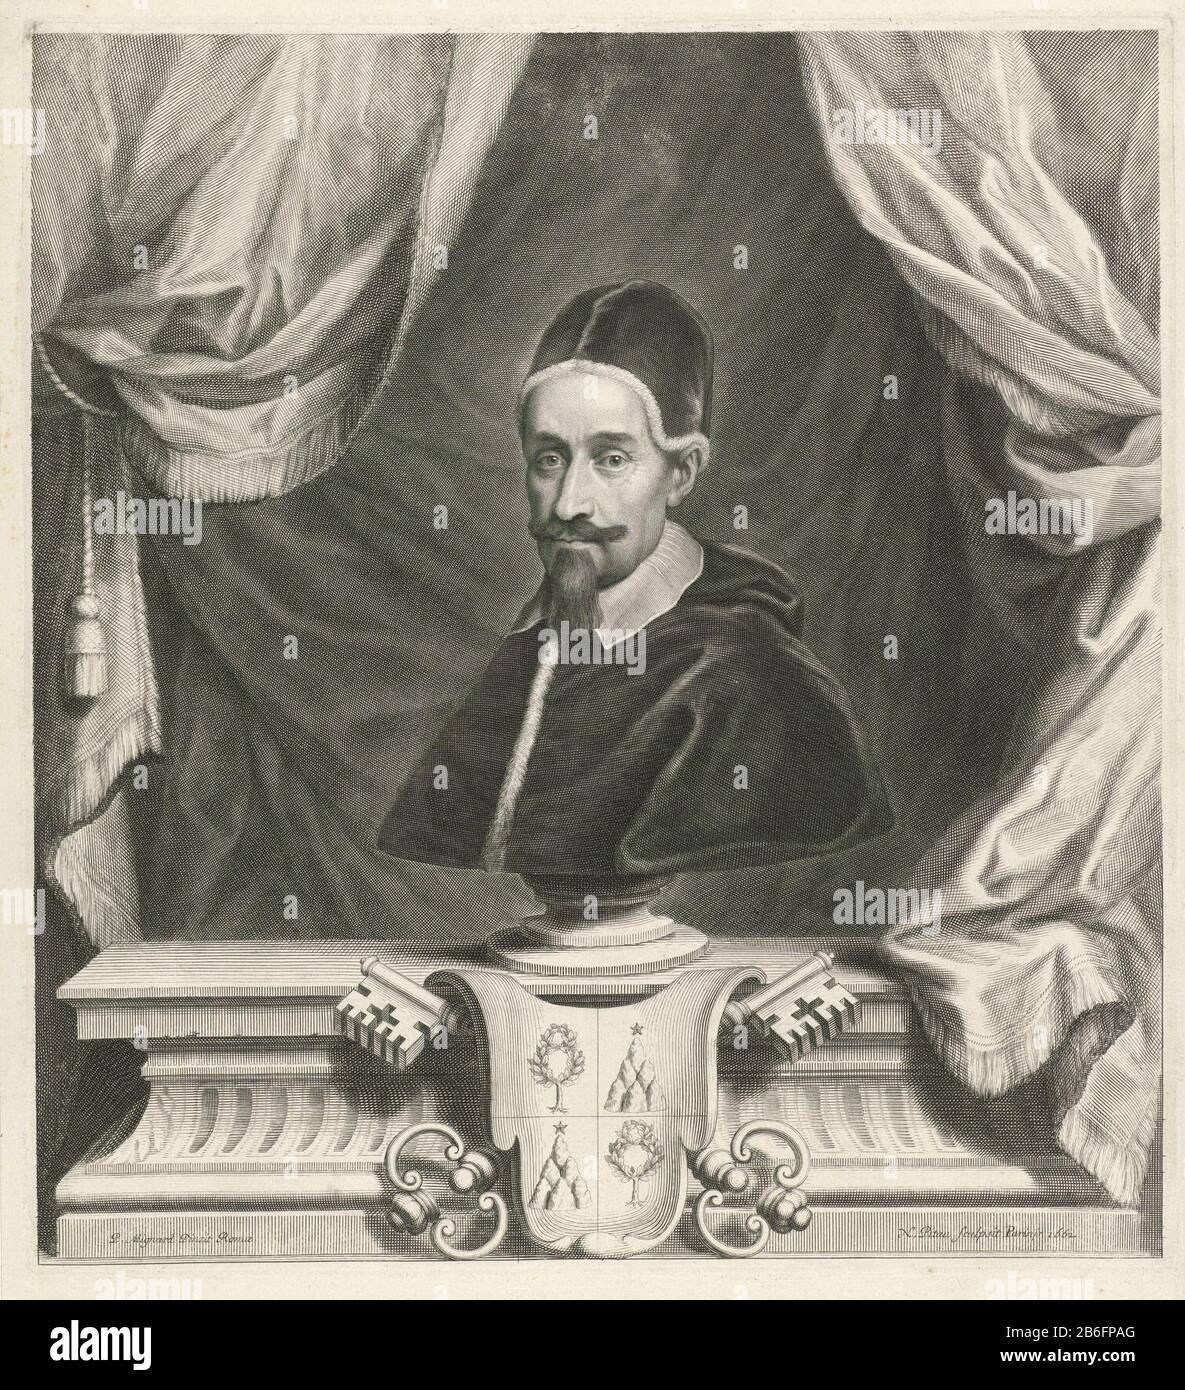 Bust Portrait of Pope Alexander VII Bust Portrait of Pope Alexander VII Object Type : picture Item number: RP-P-OB-61.140Catalogusreferentie: Wurzbach 21 Inscriptions / Brands: collector's mark, verso lower left, stamped: Lugt 240 Manufacturer : printmaker: Nicolas Pitau (I) (listed on object) to painting of: Pierre Mignard (1612-1695) (referred to on object) Place manufacture: print maker: Paris to painting of: Rome Date: 1662 Physical characteristics: engra material: paper Technique: engra (printing process) Measurements: plate edge: h 414 mm × b 382 mm Subject: popearmorial bearing, heraldr Stock Photo